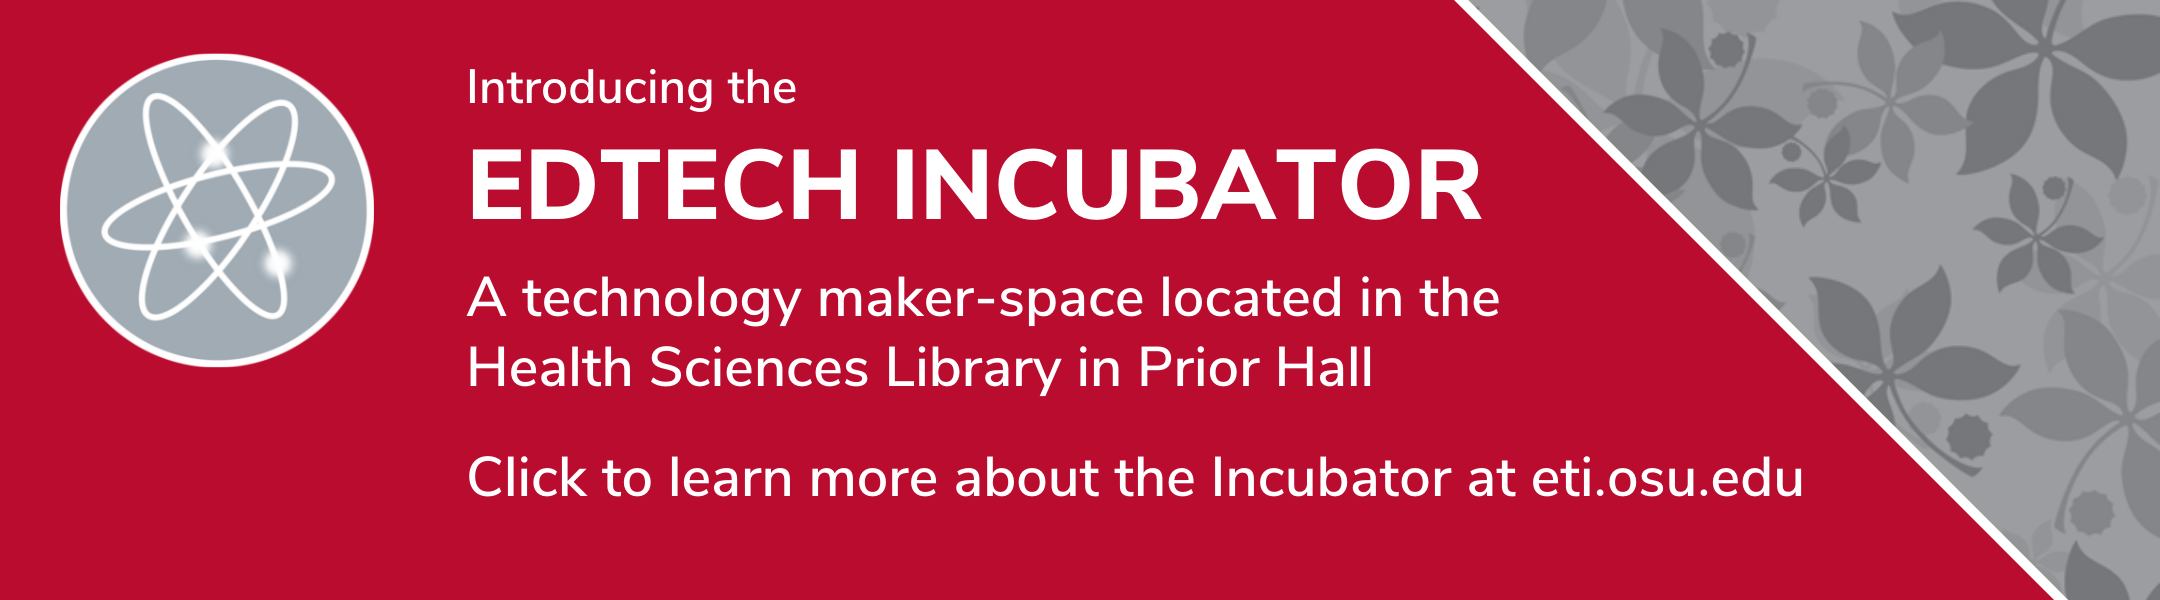 Find out more about the EdTech Incubator, a collaborative technology maker space located in the Health Sciences Library in Prior Hall. Click on this image to visit the EdTech Incubator website at ETI.OSU.EDU.